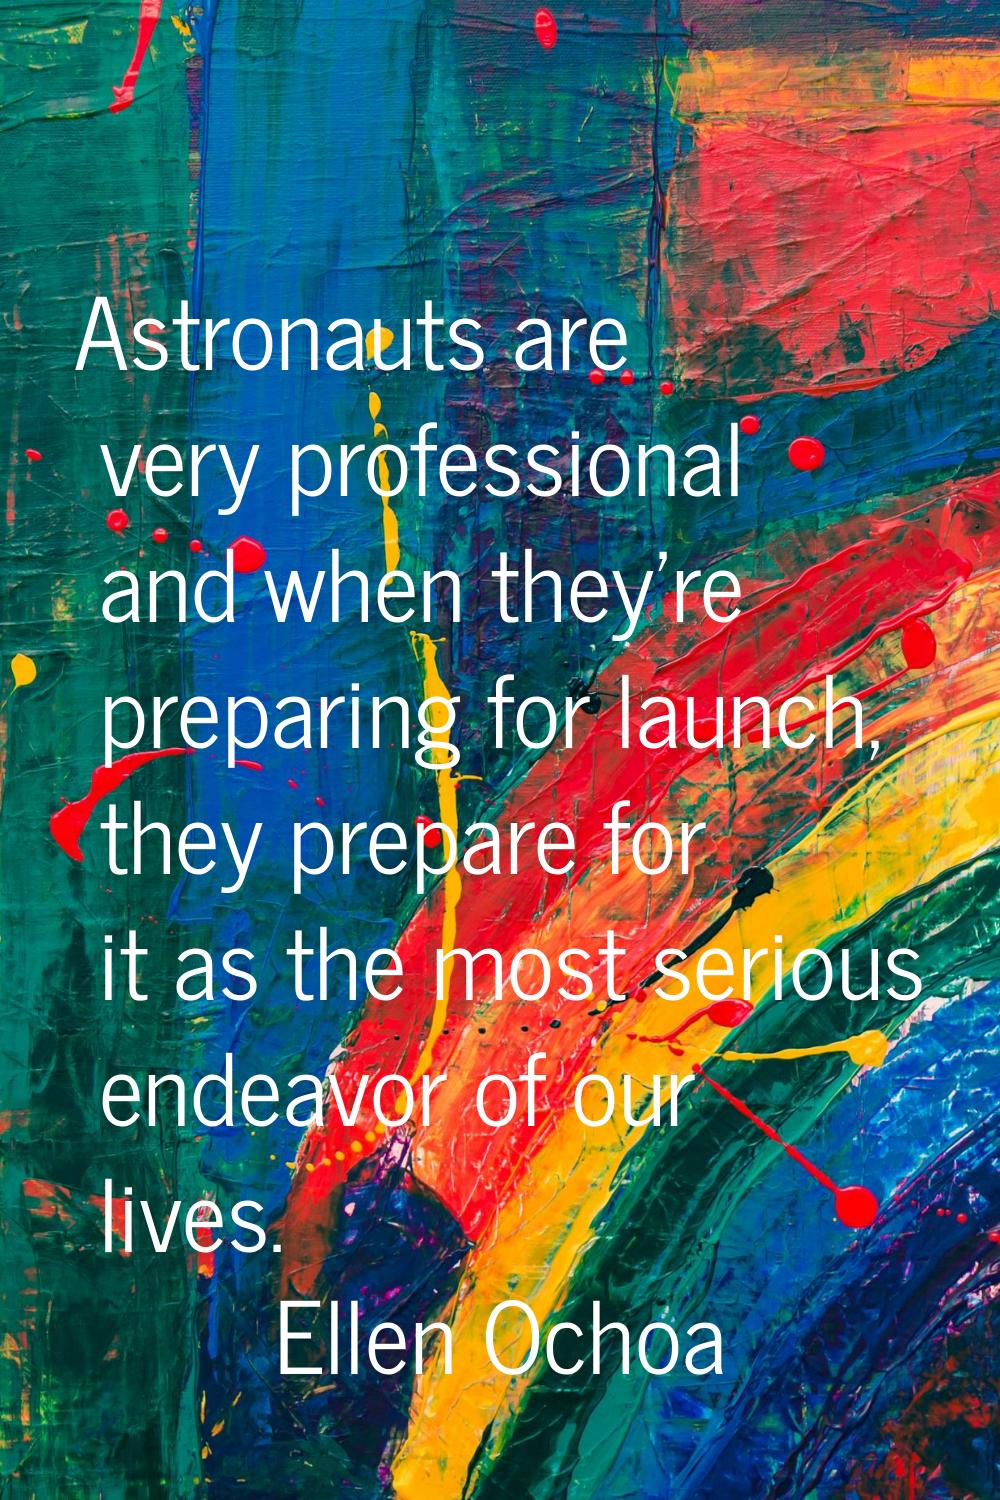 Astronauts are very professional and when they're preparing for launch, they prepare for it as the 